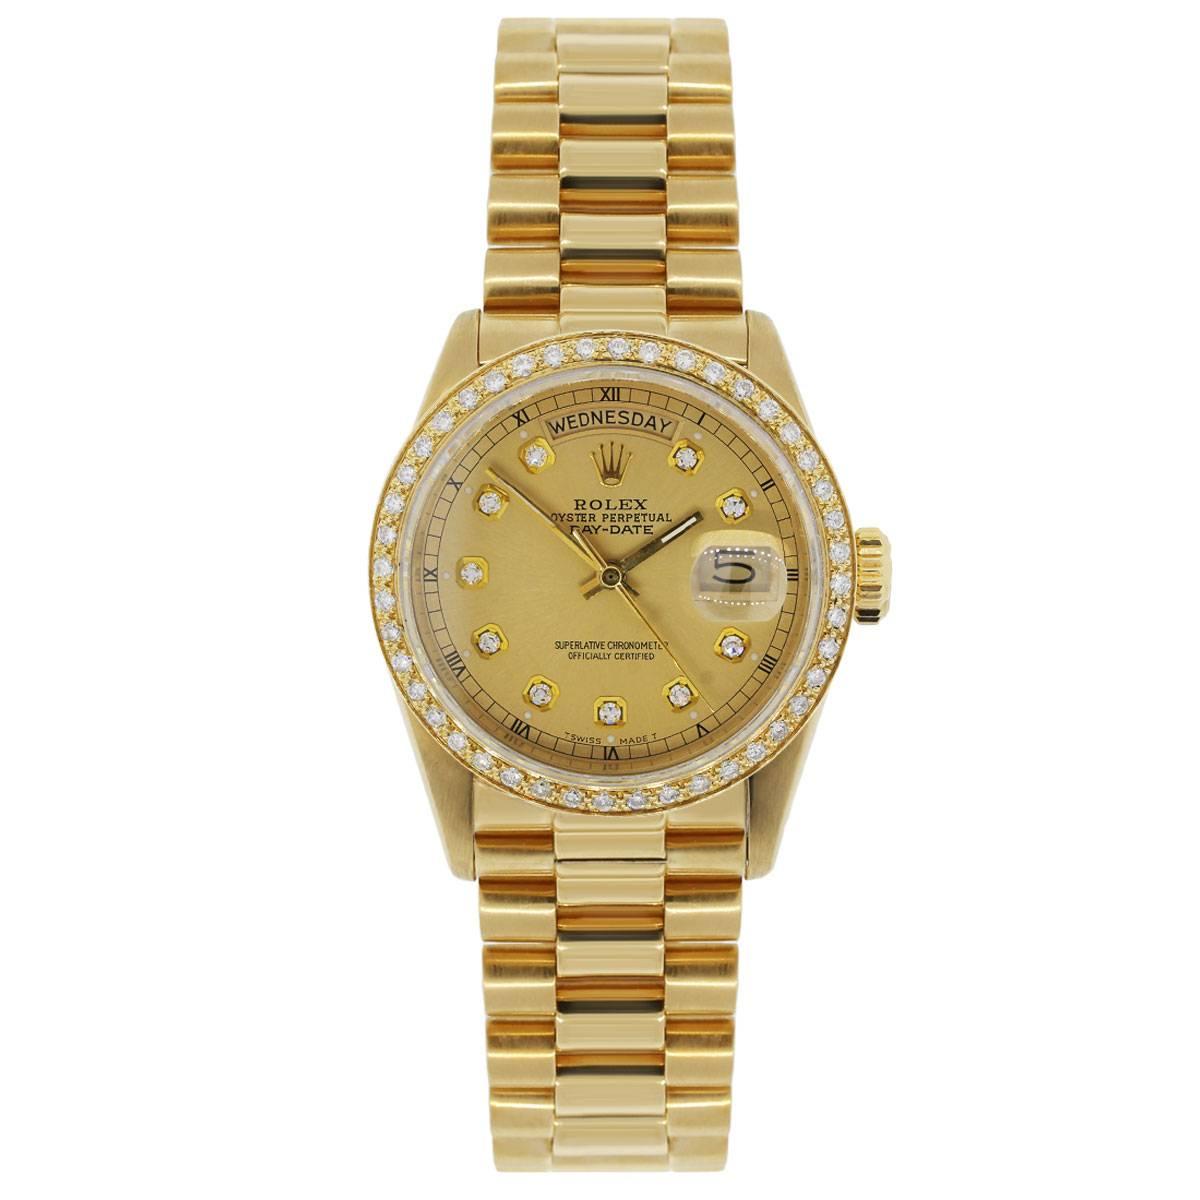 Brand: Rolex
MPN: 18038
Model: Day-Date
Case Material: 18k Yellow Gold
Case Diameter: 36mm
Crystal: Sapphire crystal (scratch resistant)
Bezel: Diamond bezel (aftermarket)
Dial: Champagne diamond day date dial (aftermarket) Bracelet: Presidential